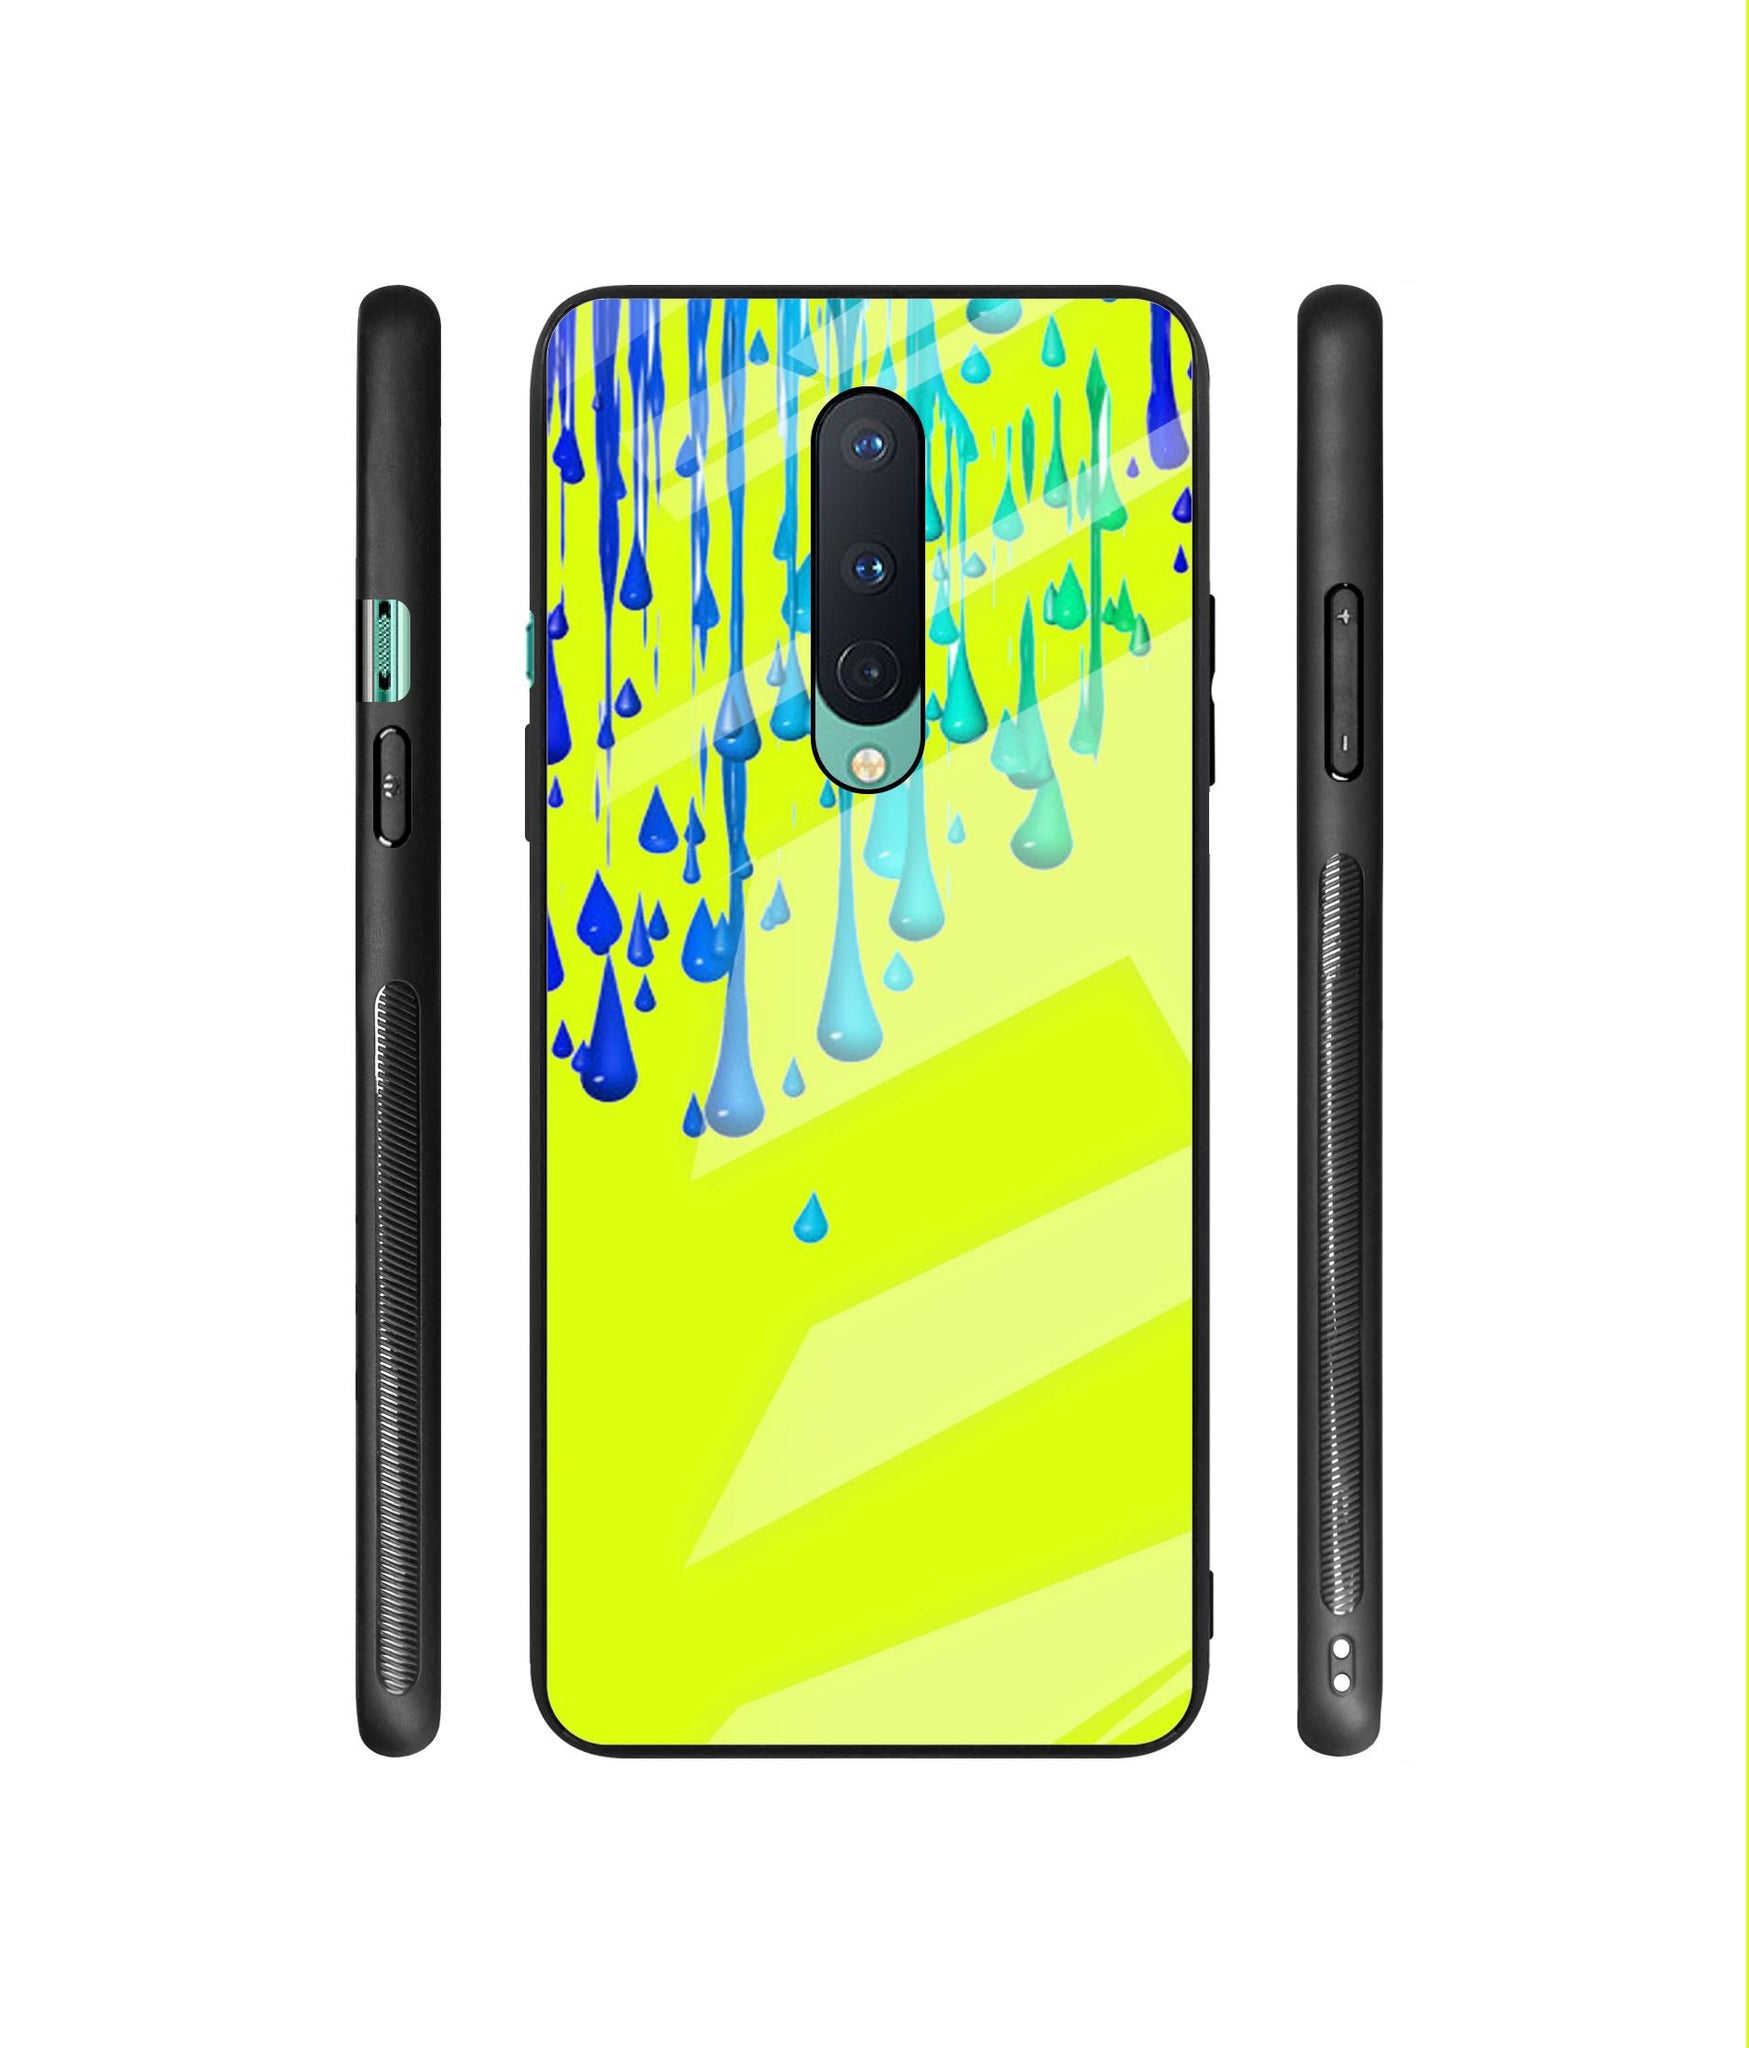 Neon Paint Designer Printed Glass Cover for OnePlus 8